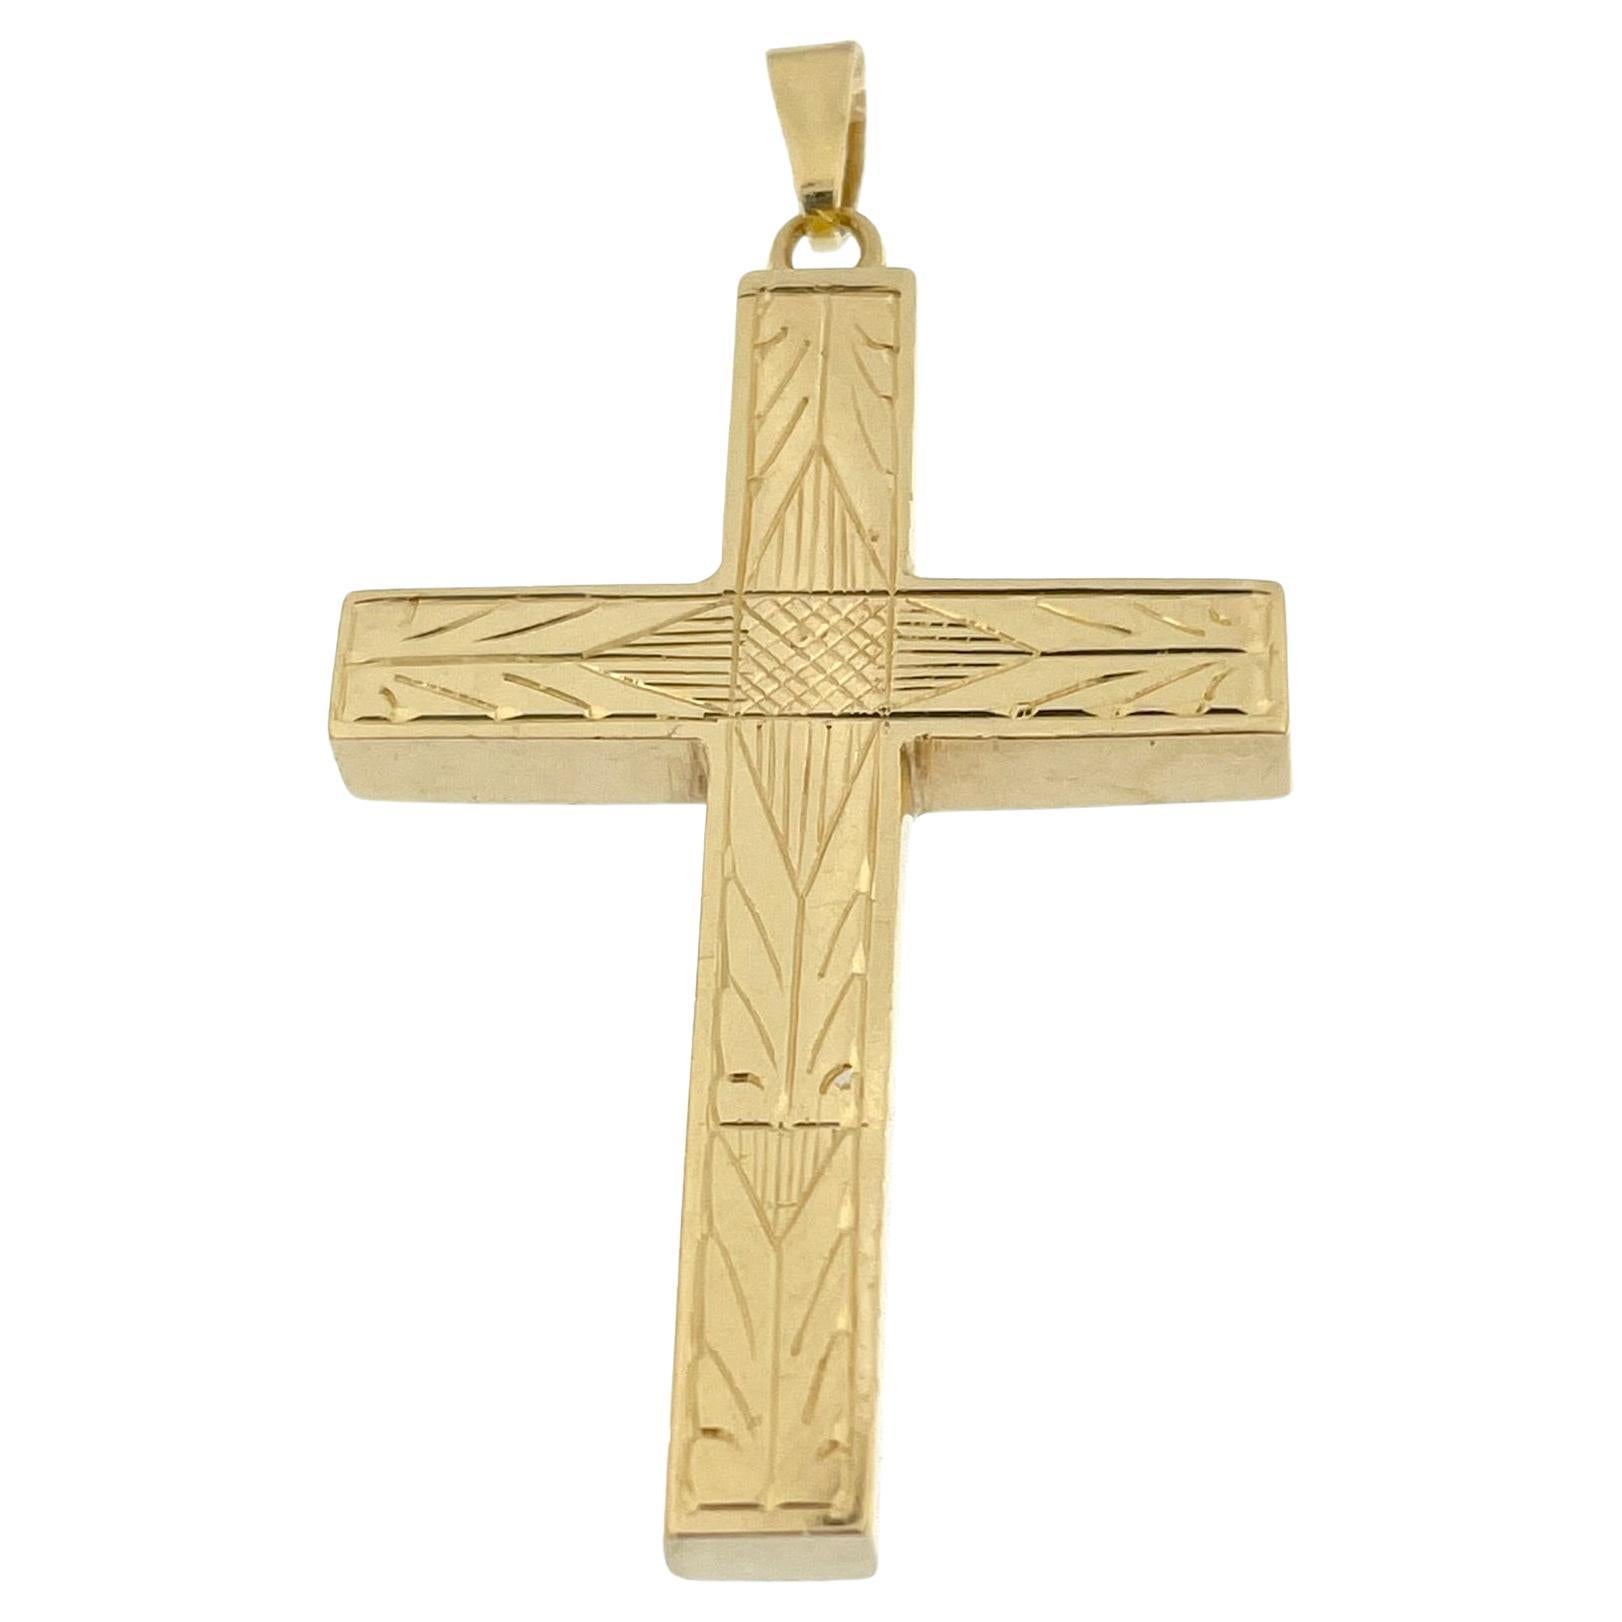 Vintage French Cross 18 karat Yellow Gold with Geometric Patterns For Sale